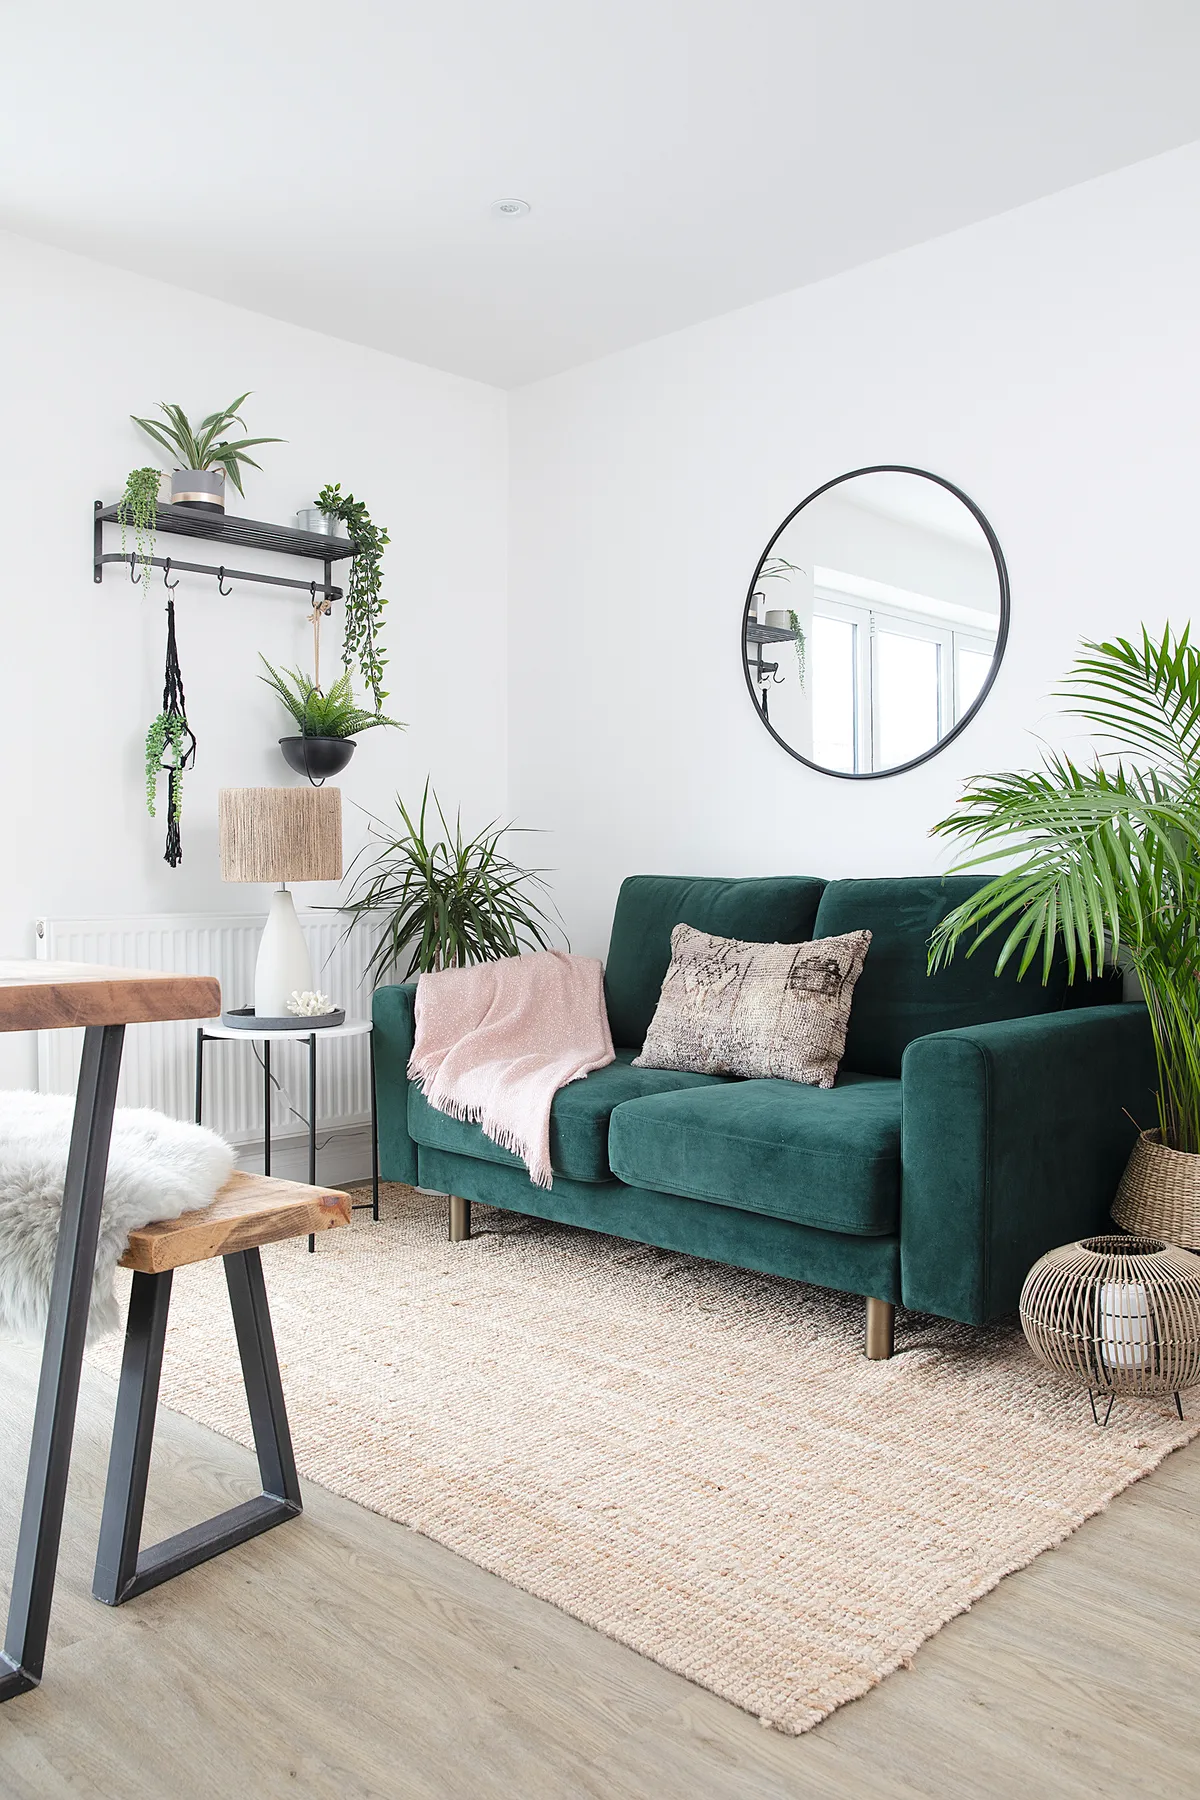 ‘I love our green sofa from Snug, as it pops against the white walls. The lamp was an upcycling project using paint for the base and jute twine around the shade. It works well with the natural textures of the IKEA rug and cushion from Bazar Du Sud. The shelf was an Aldi bargain at £10 but they sell similar in The Cotswold Co.’